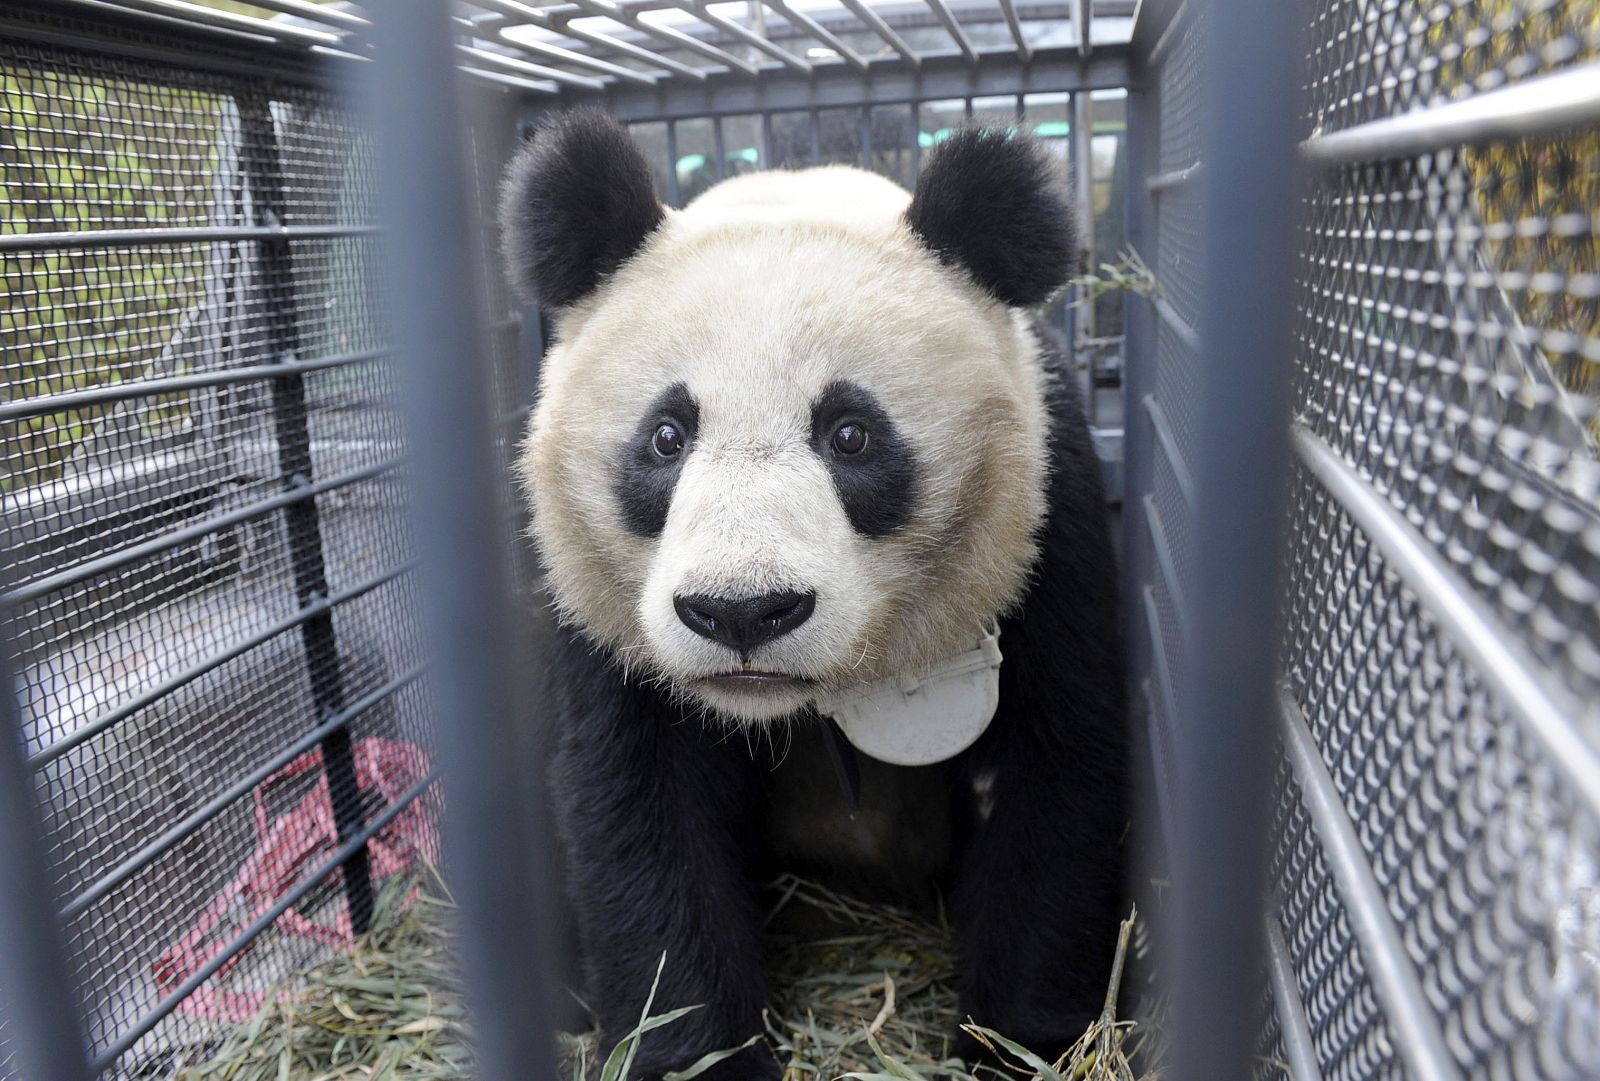 Luxin, a 3-year-old female panda, is seen in a cage before being released into the wild on the outskirts of Shimian County